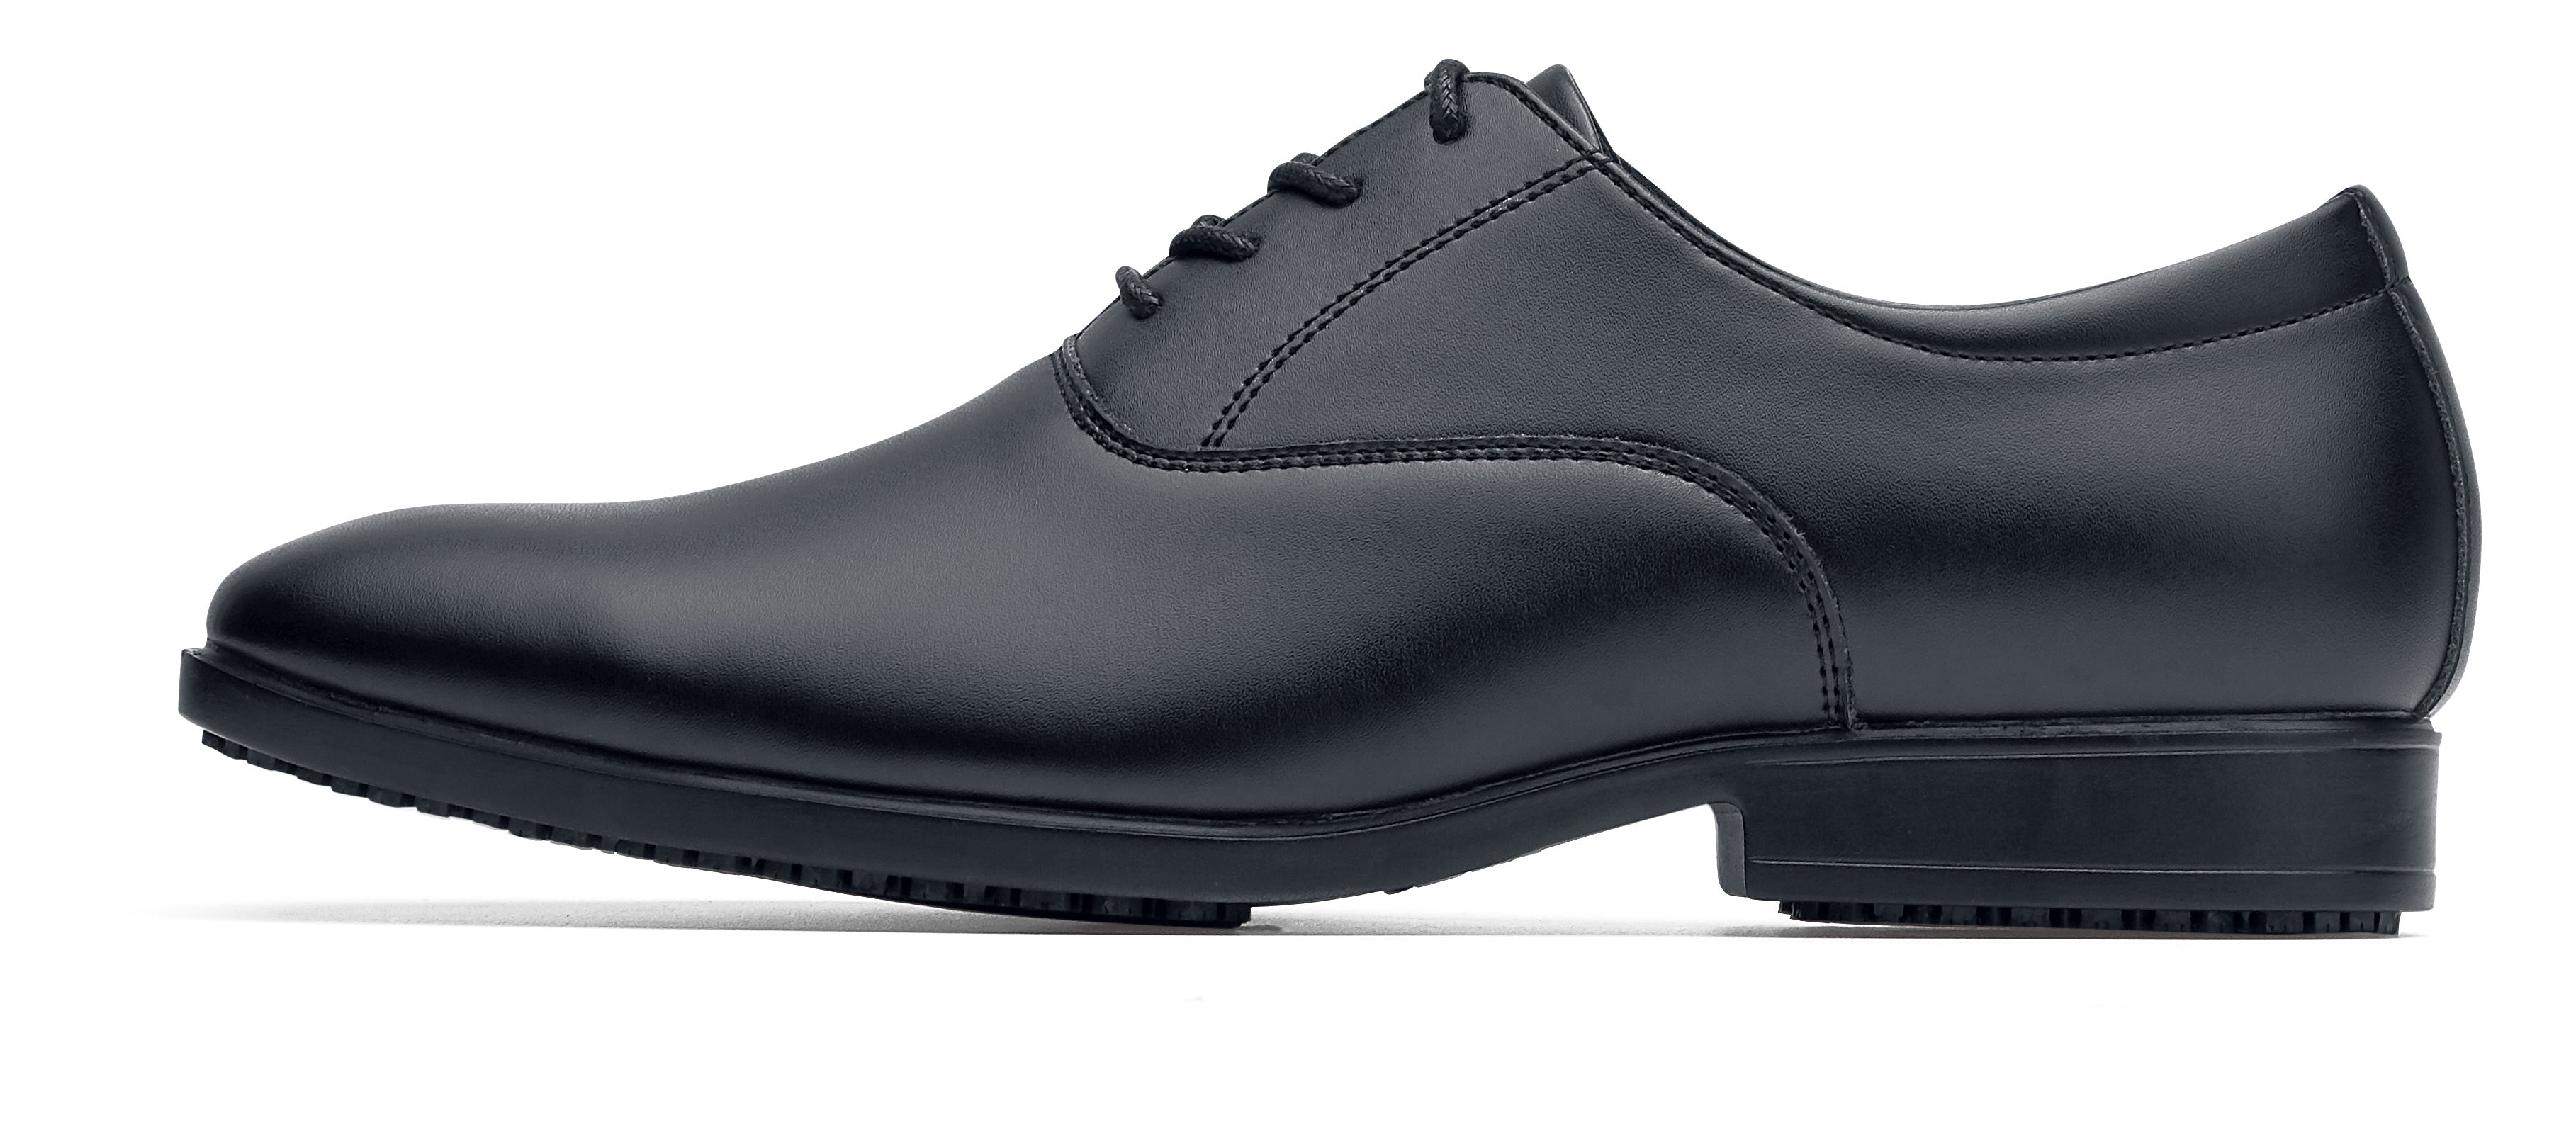 Slip resistant black formal shoe with Water Resistant Leather Upper, left side view.